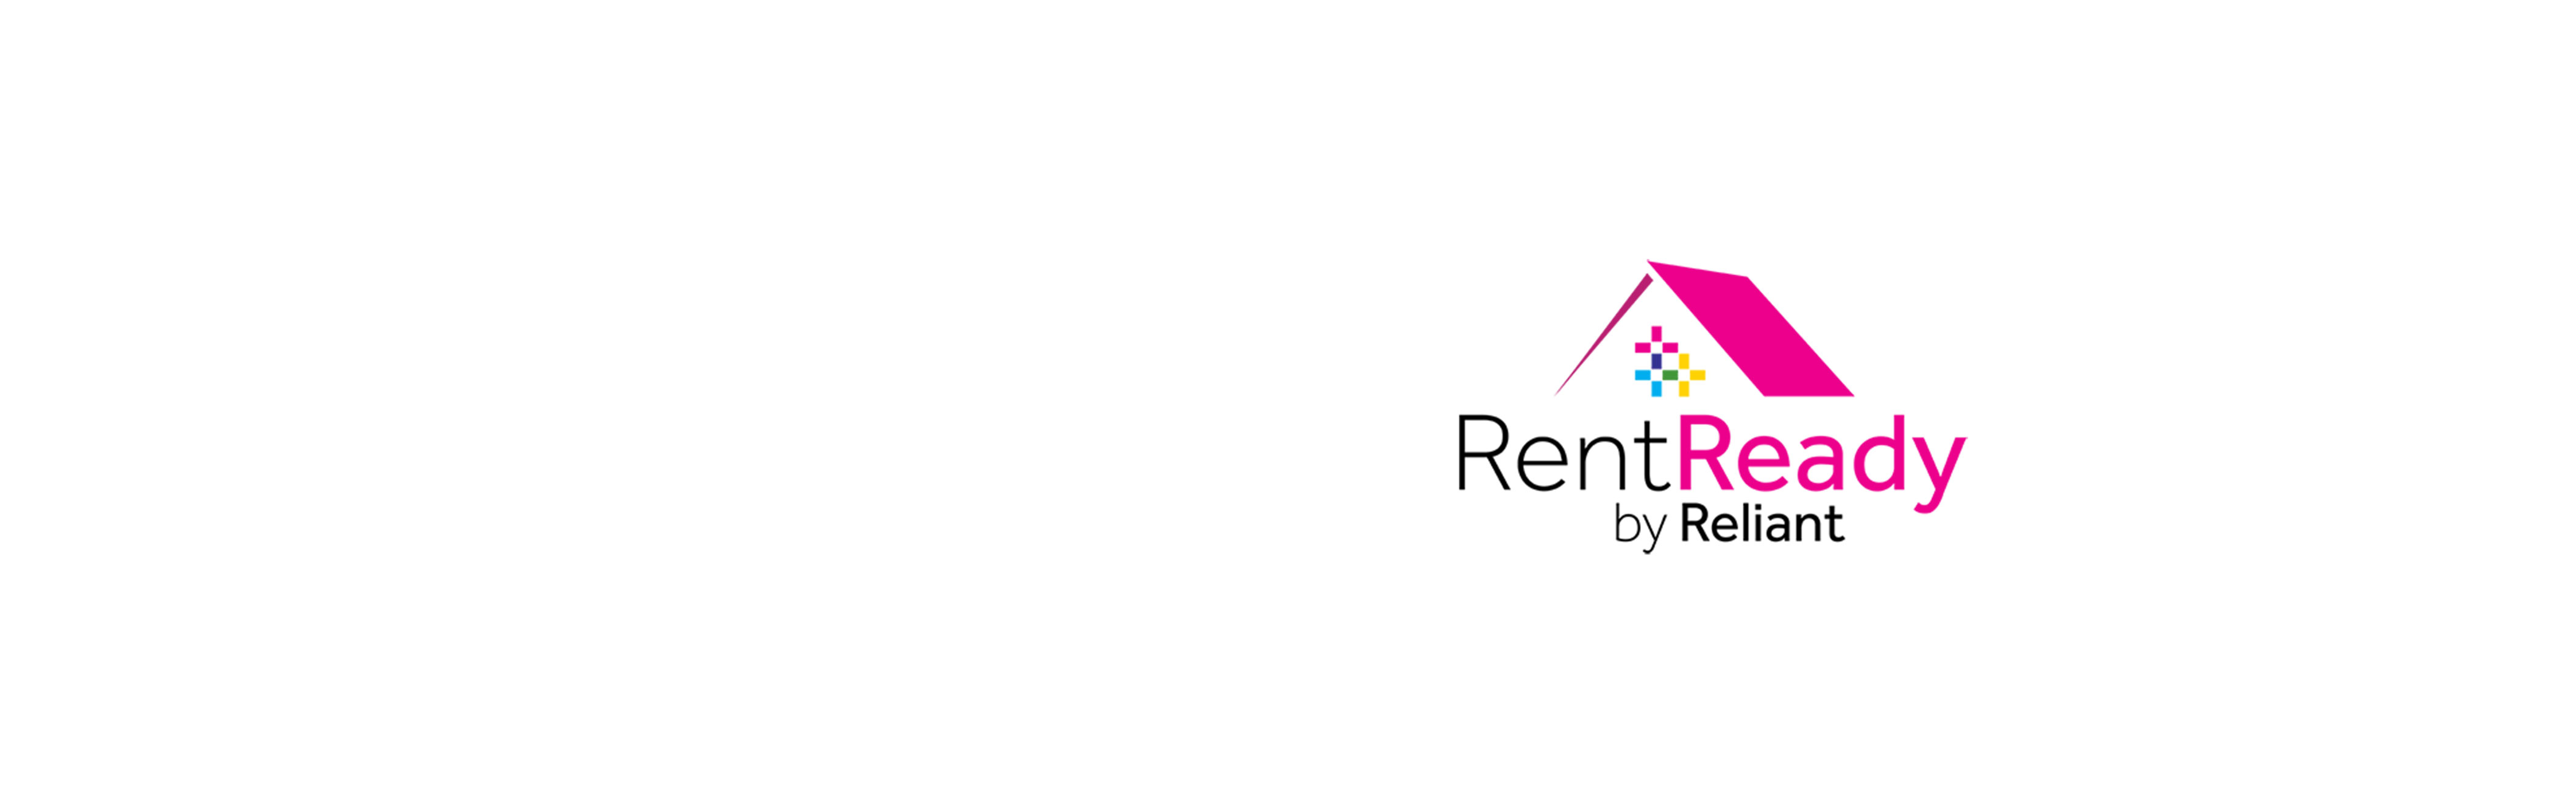 Renting an apartment? Leasing a house?
